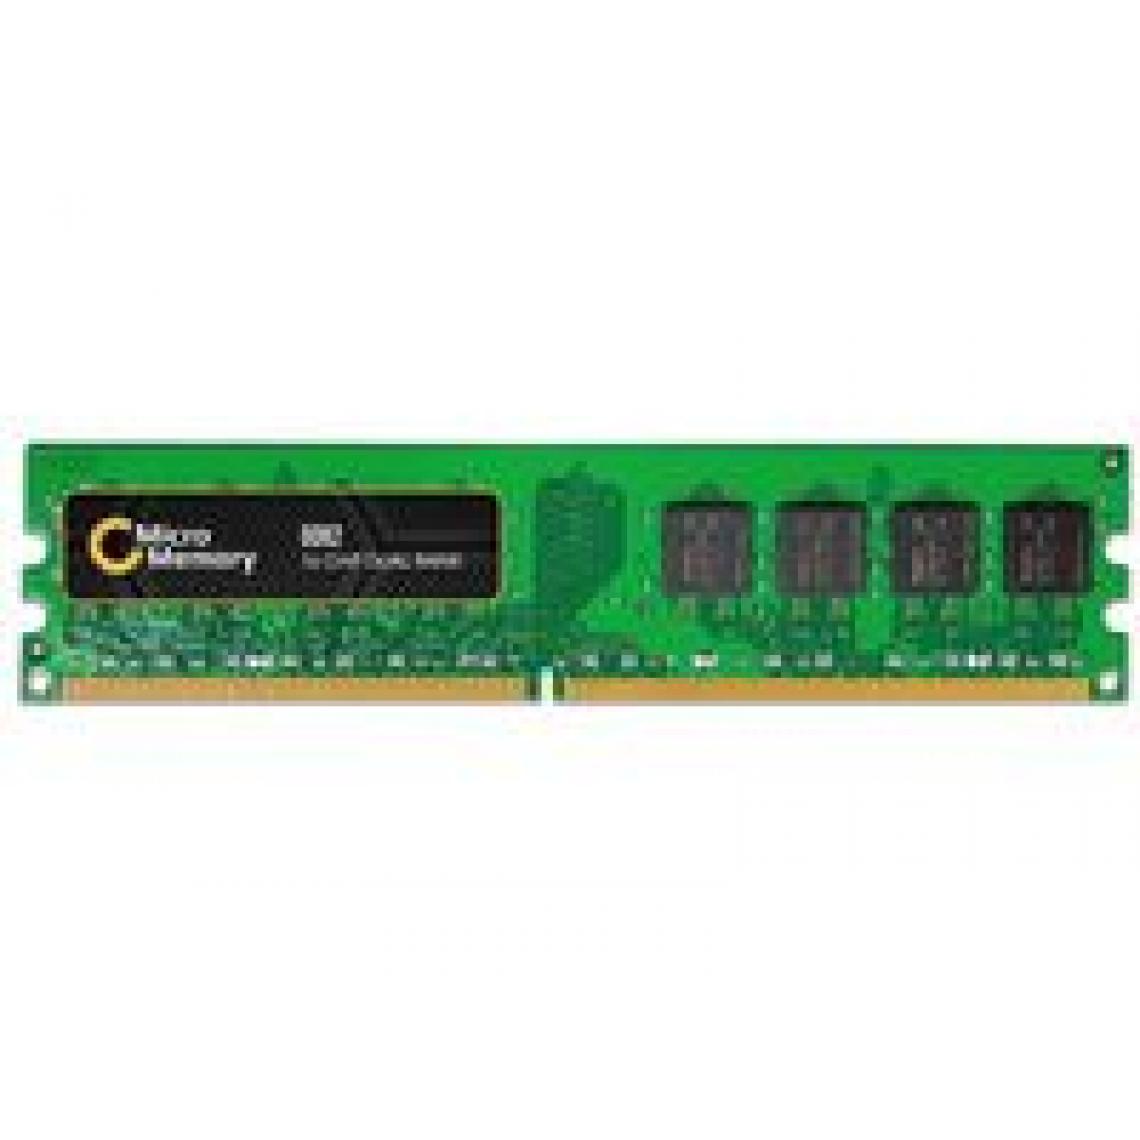 Because Music - 2GB DDR2 800MHZ DIMM Module - RAM PC Fixe